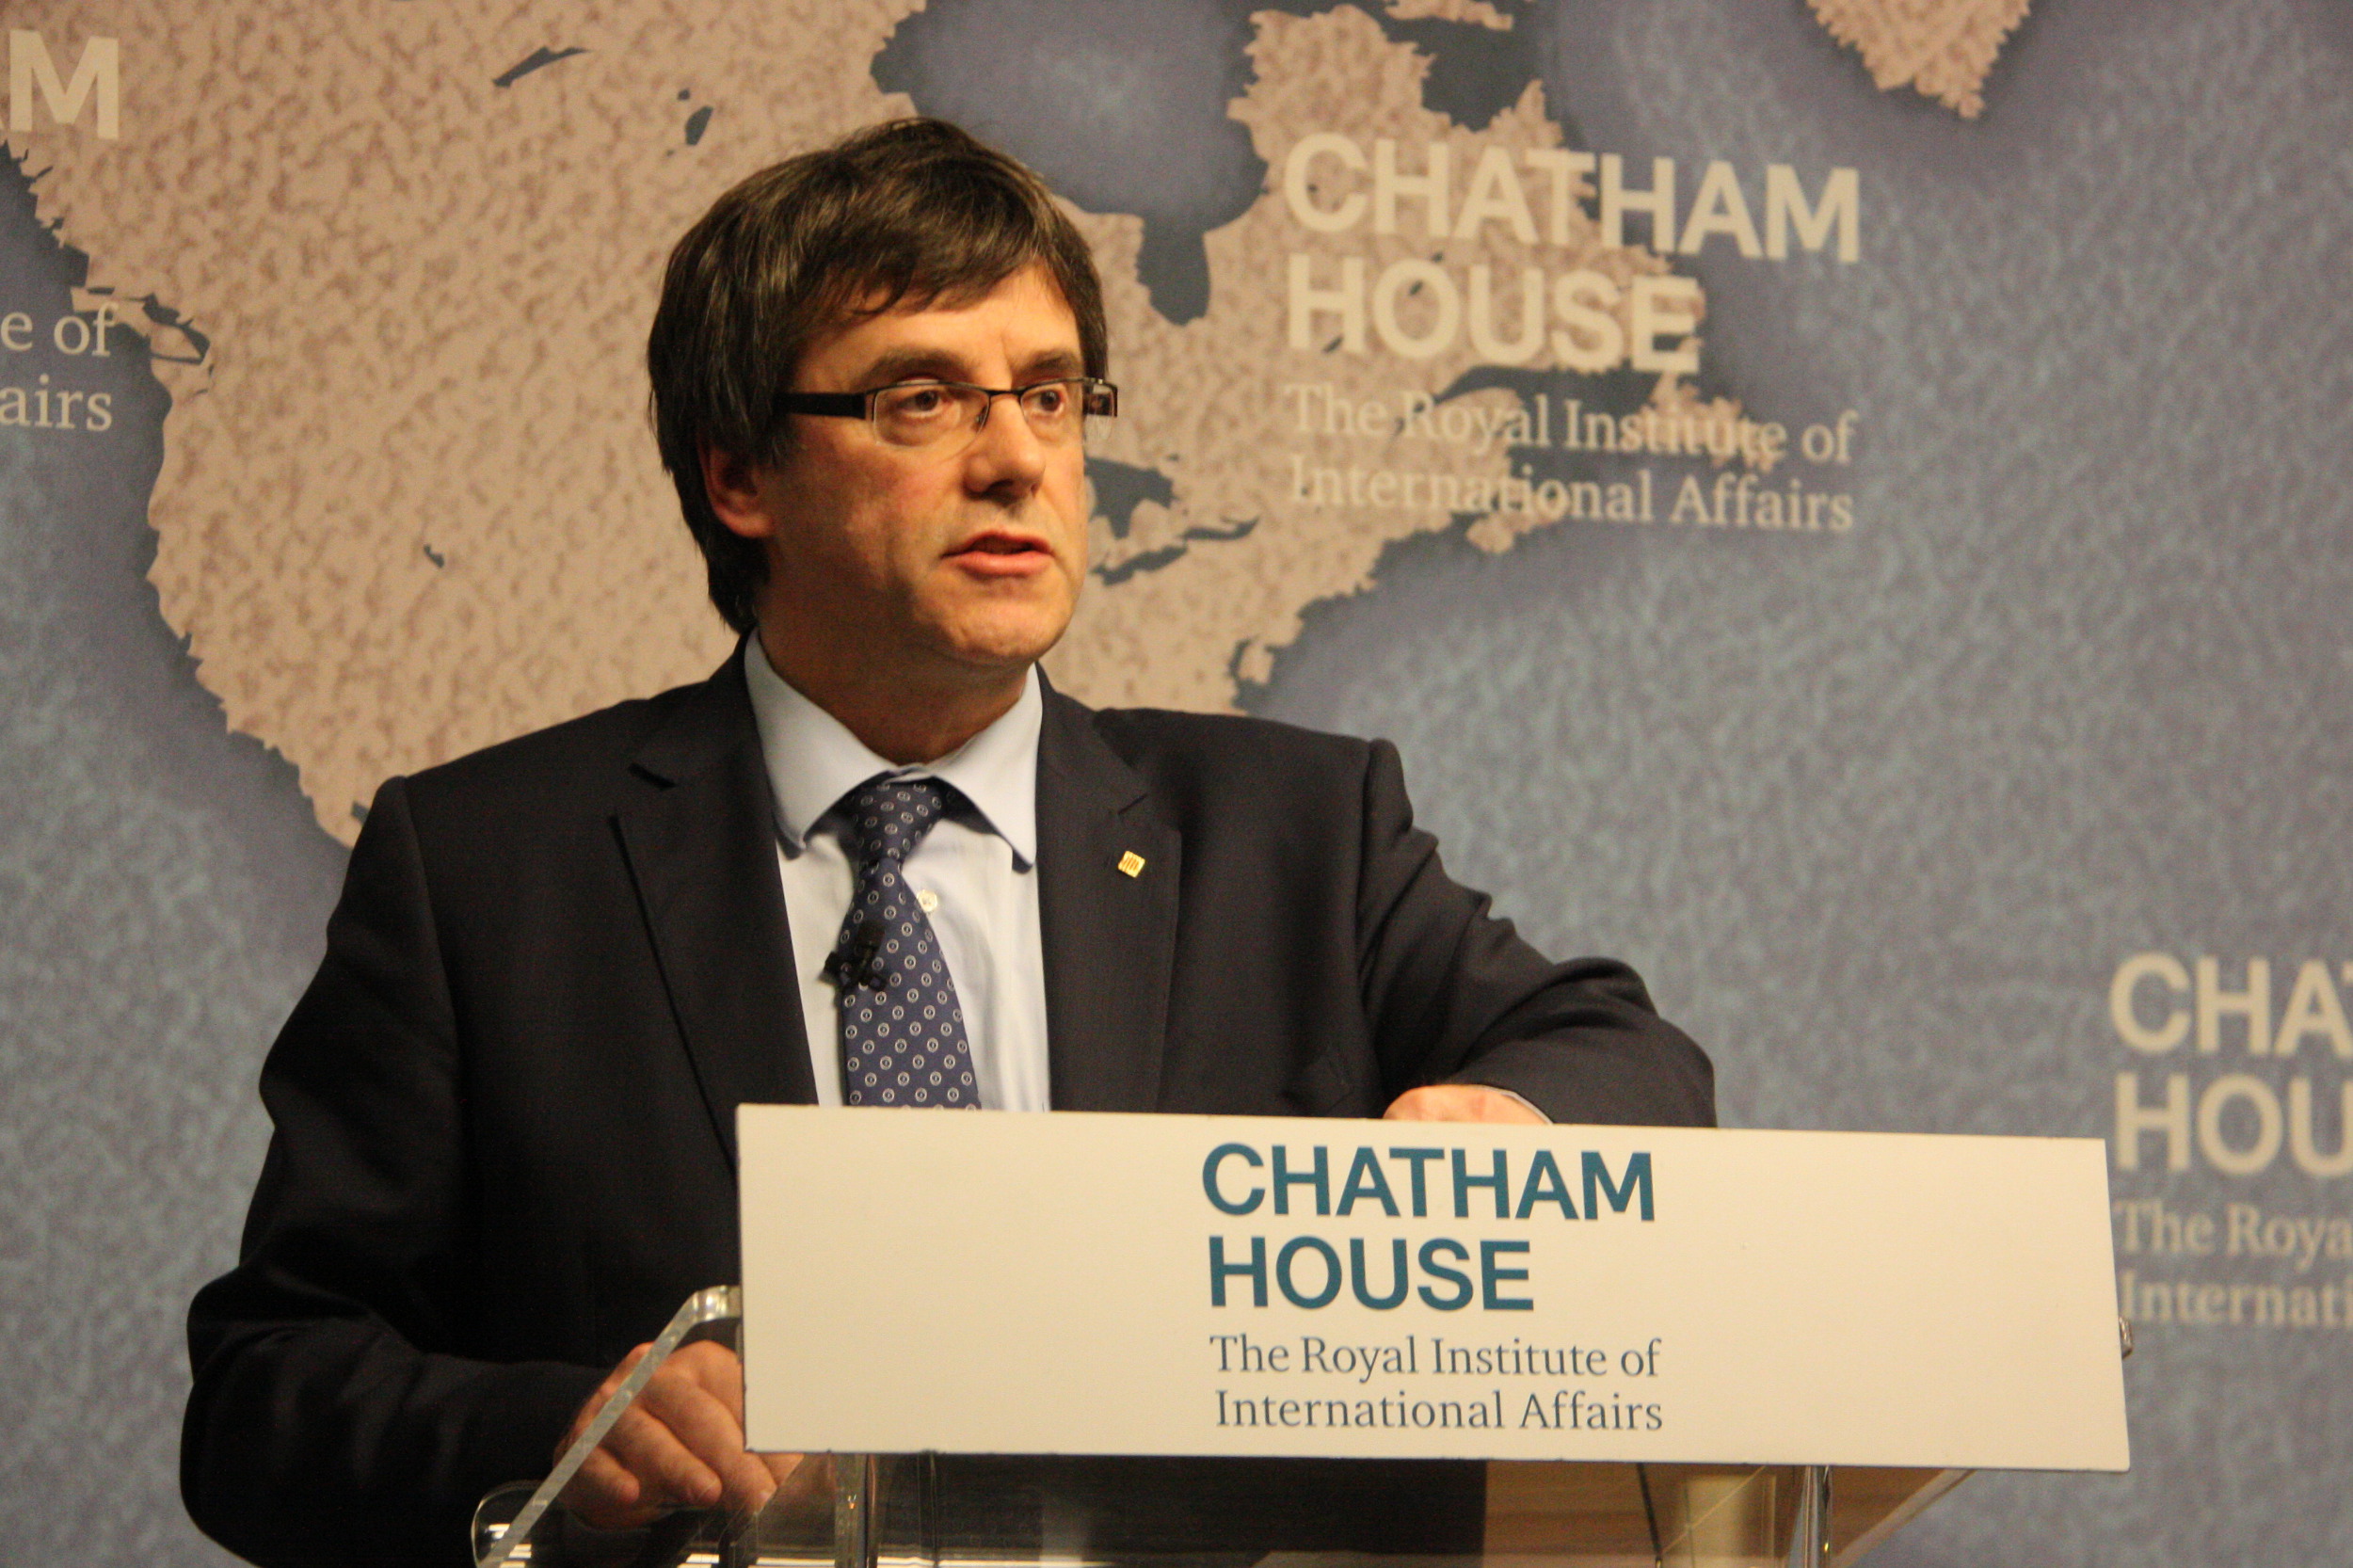 Catalan President, Carles Puigdemont, during his conference 'Mapping a path towards Catalan independence' at London's Chatham House